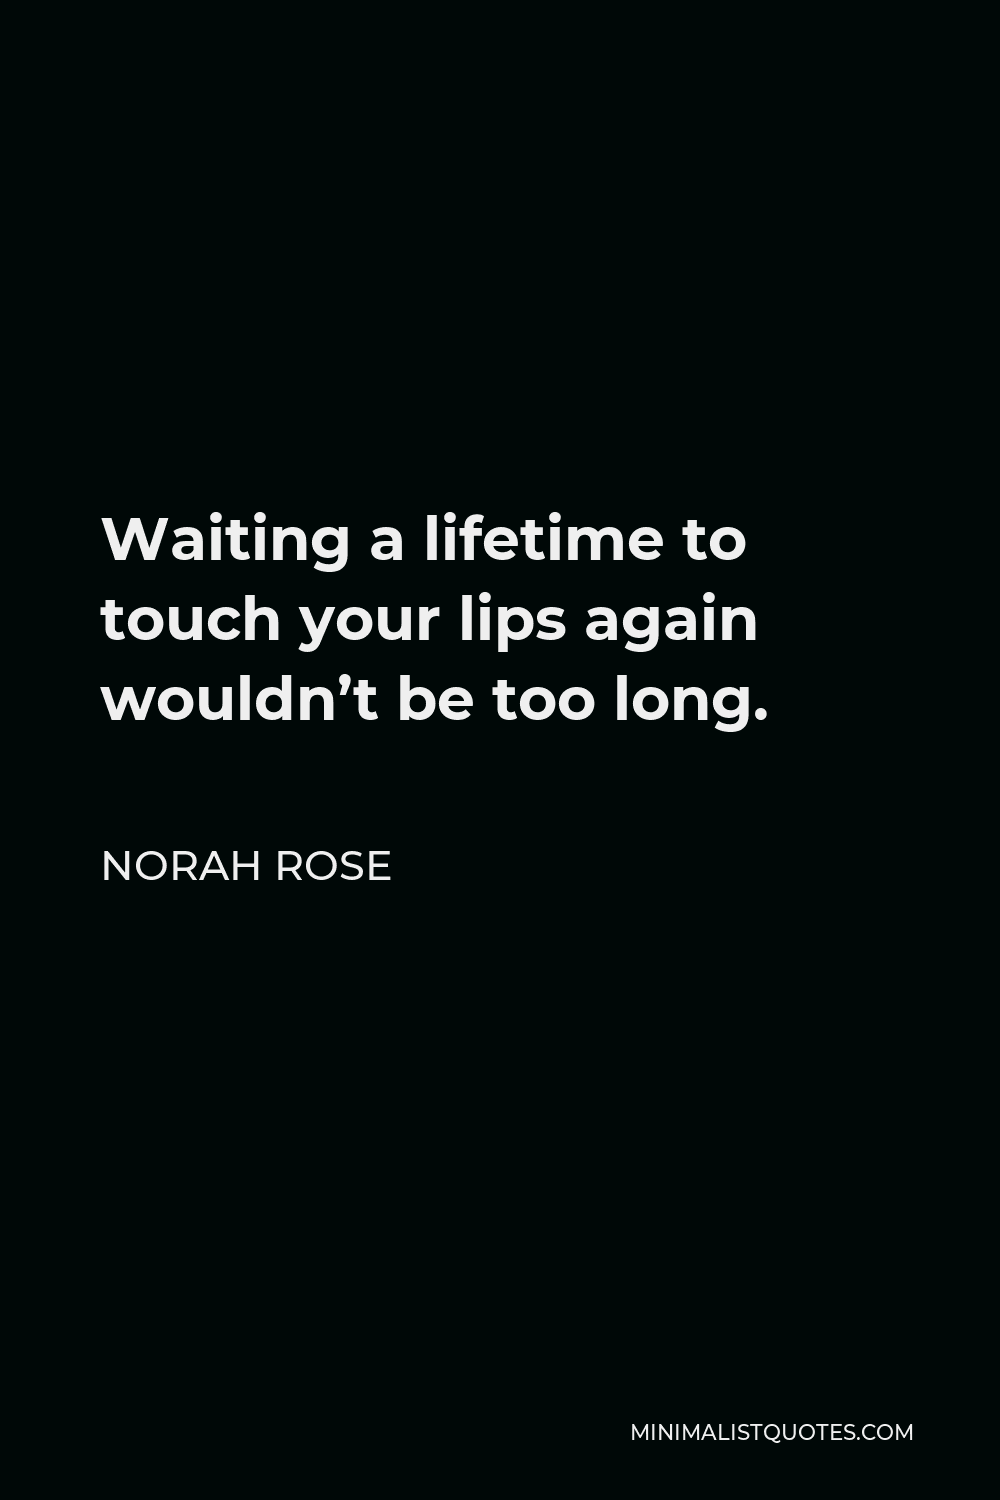 Norah Rose Quote - Waiting a lifetime to touch your lips again wouldn’t be too long.